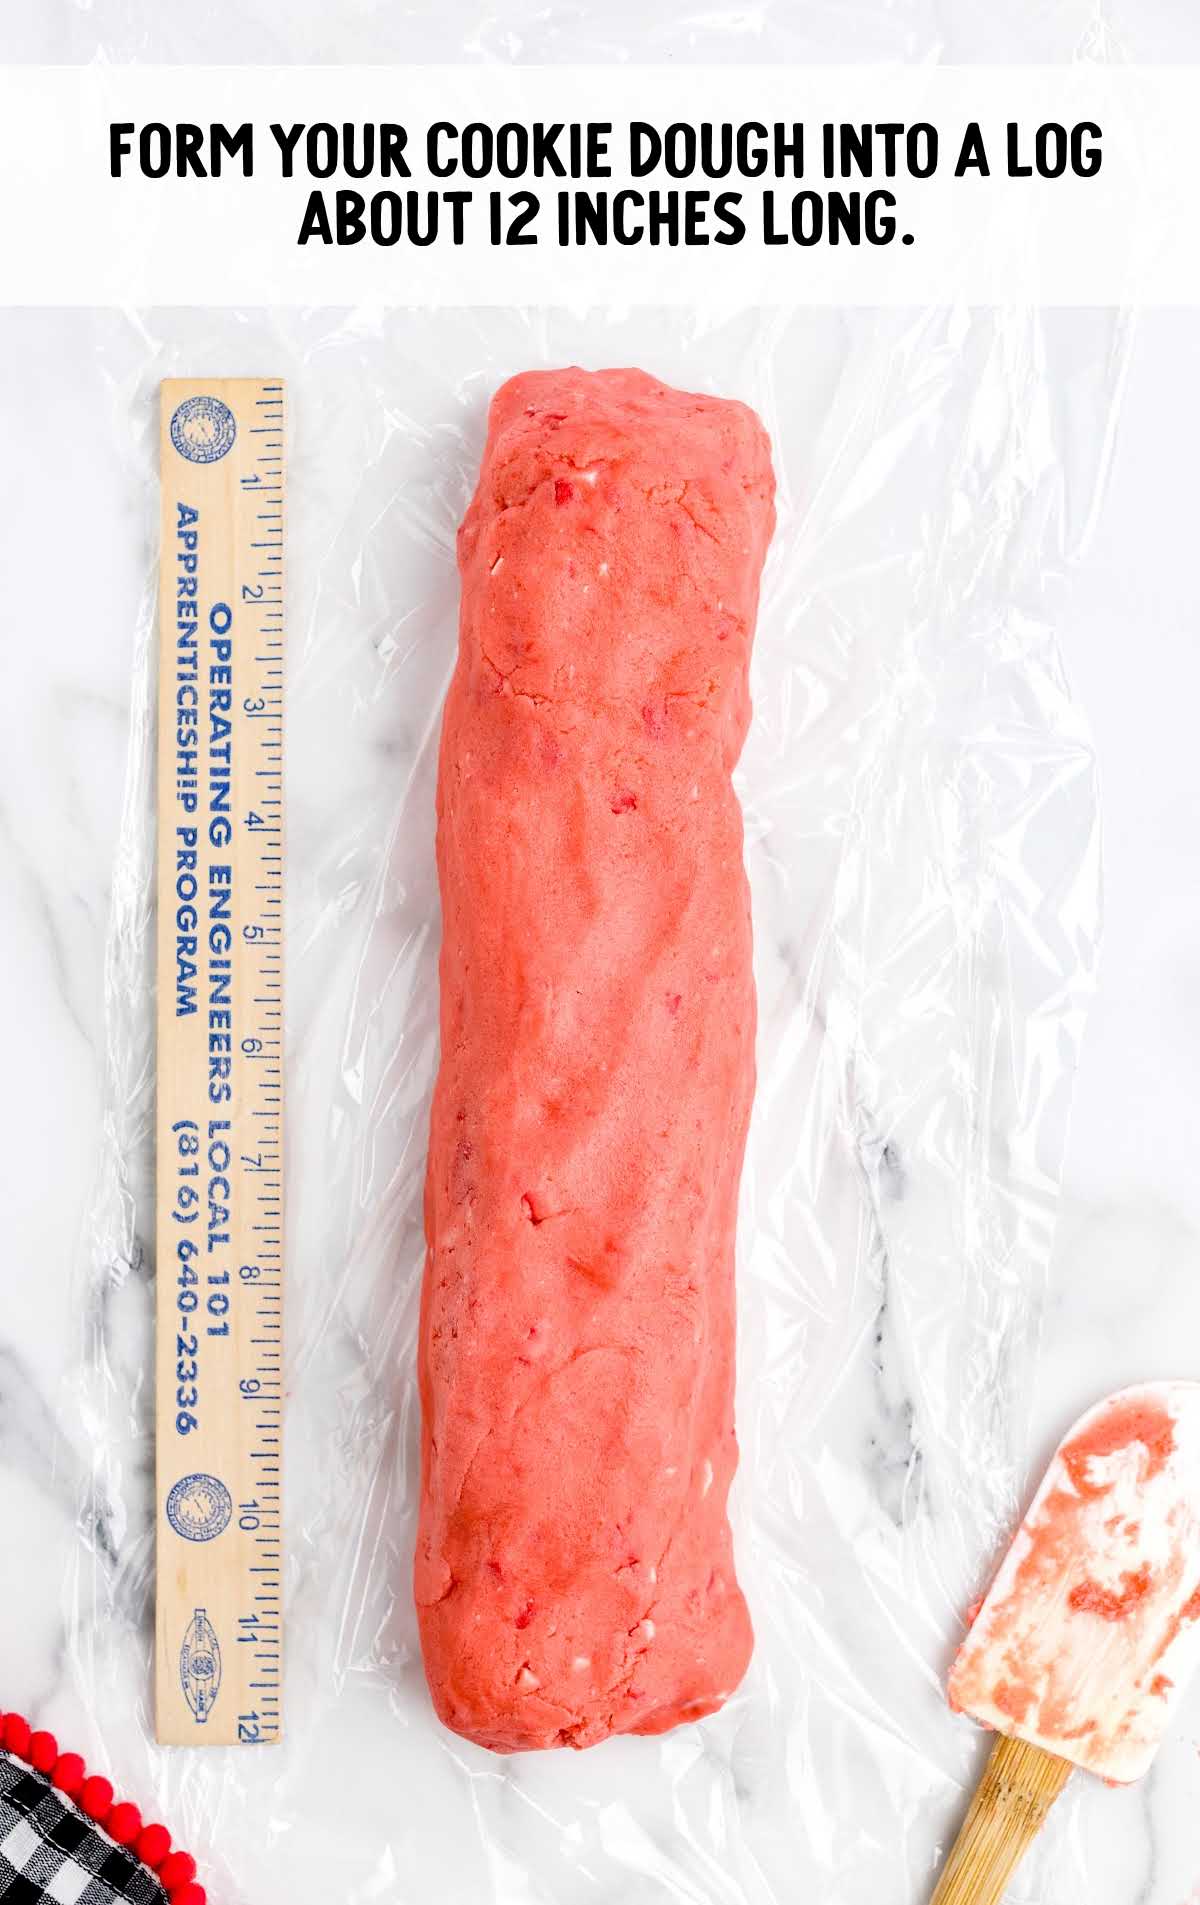 form cookie dough into 12 inches long